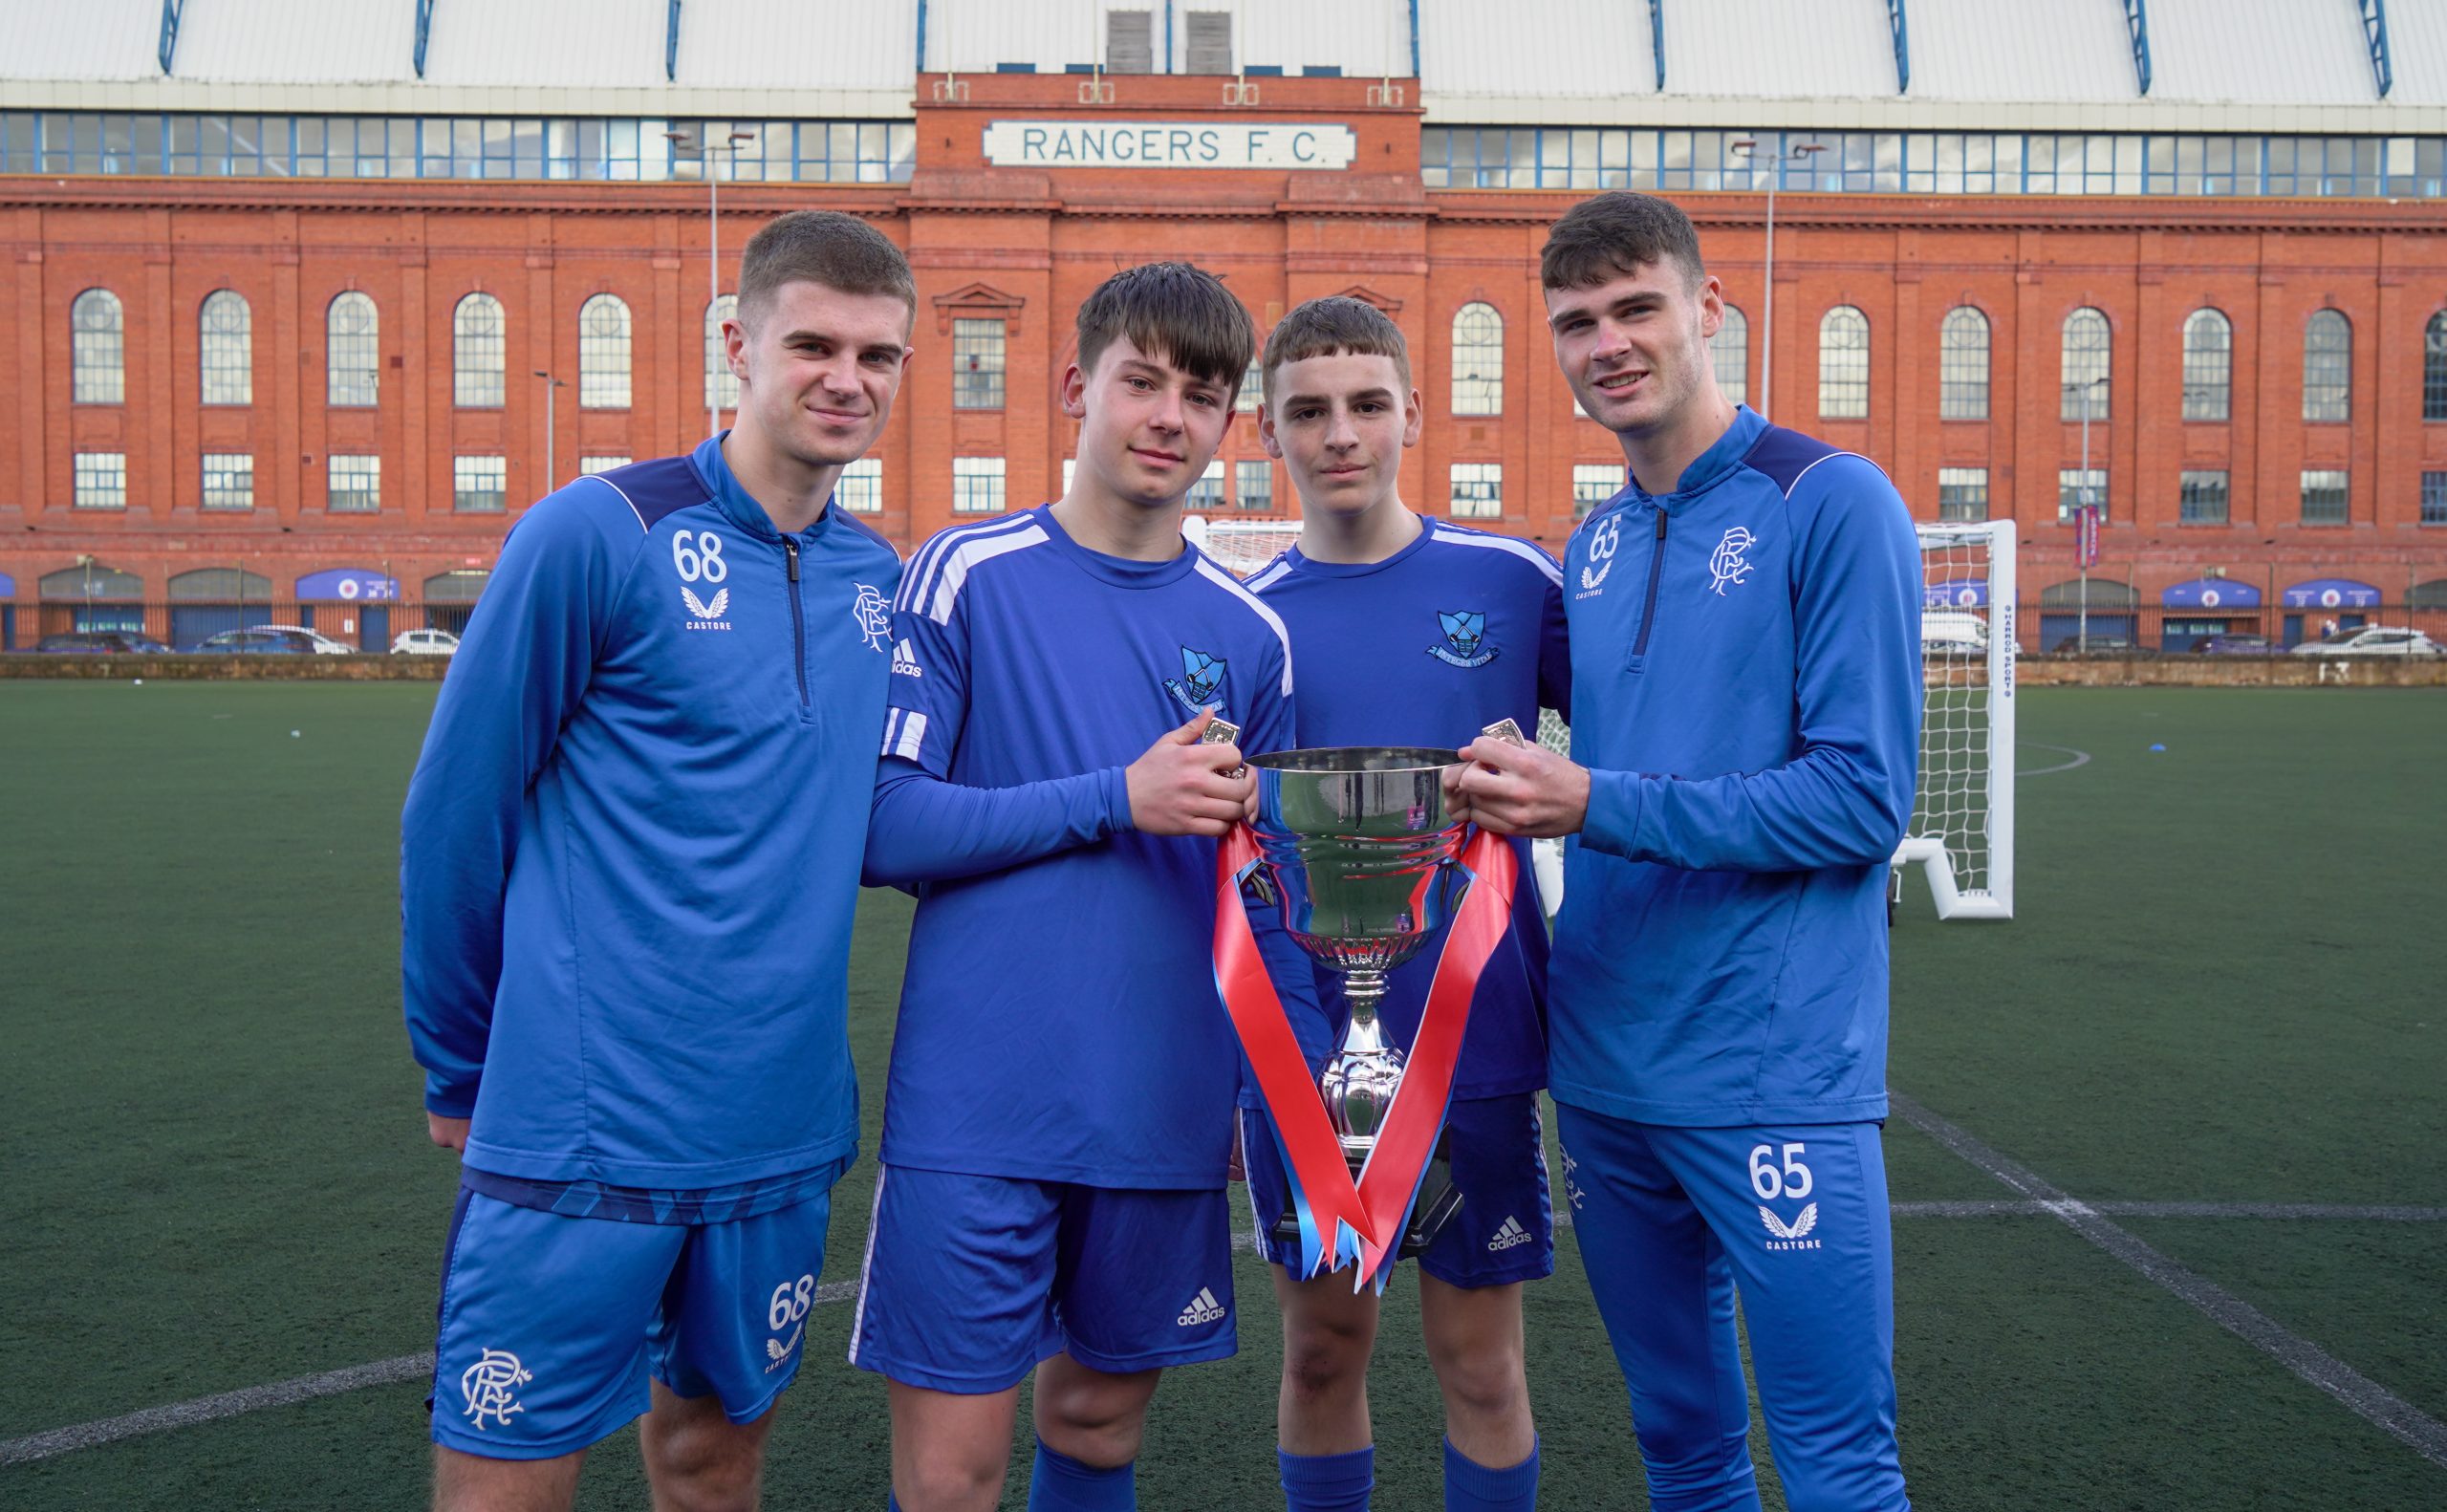 Two young male football players holding a silver trophy accompanied by two senior players either side